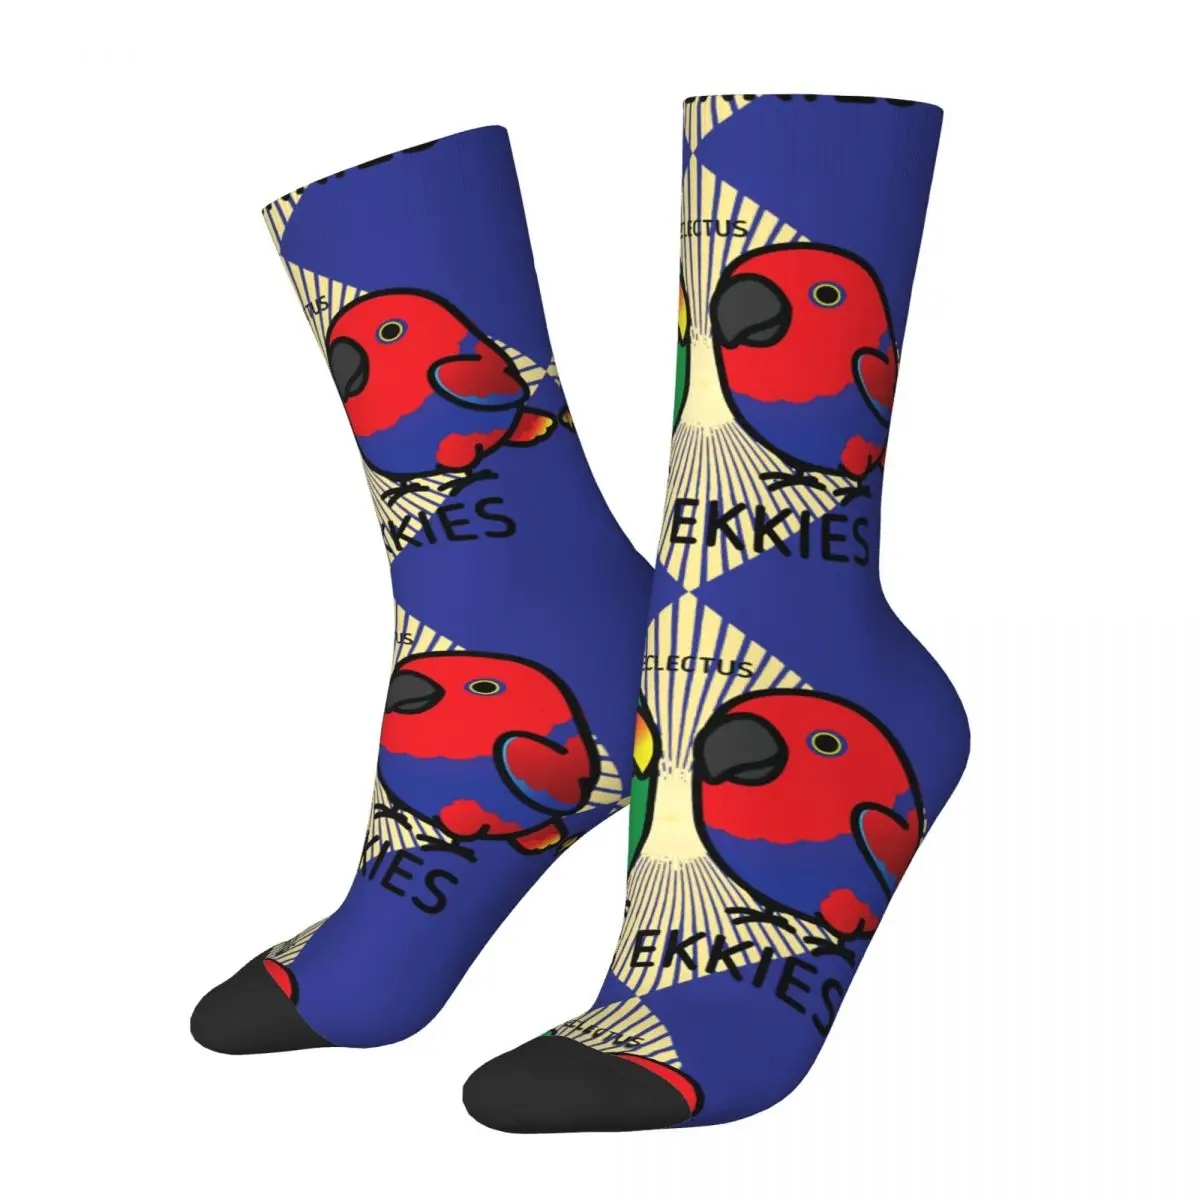 

Funny Crazy Sock for Men Dos Ekkies Hip Hop Vintage Parrot Happy Quality Pattern Printed Boys Crew compression Sock Casual Gift